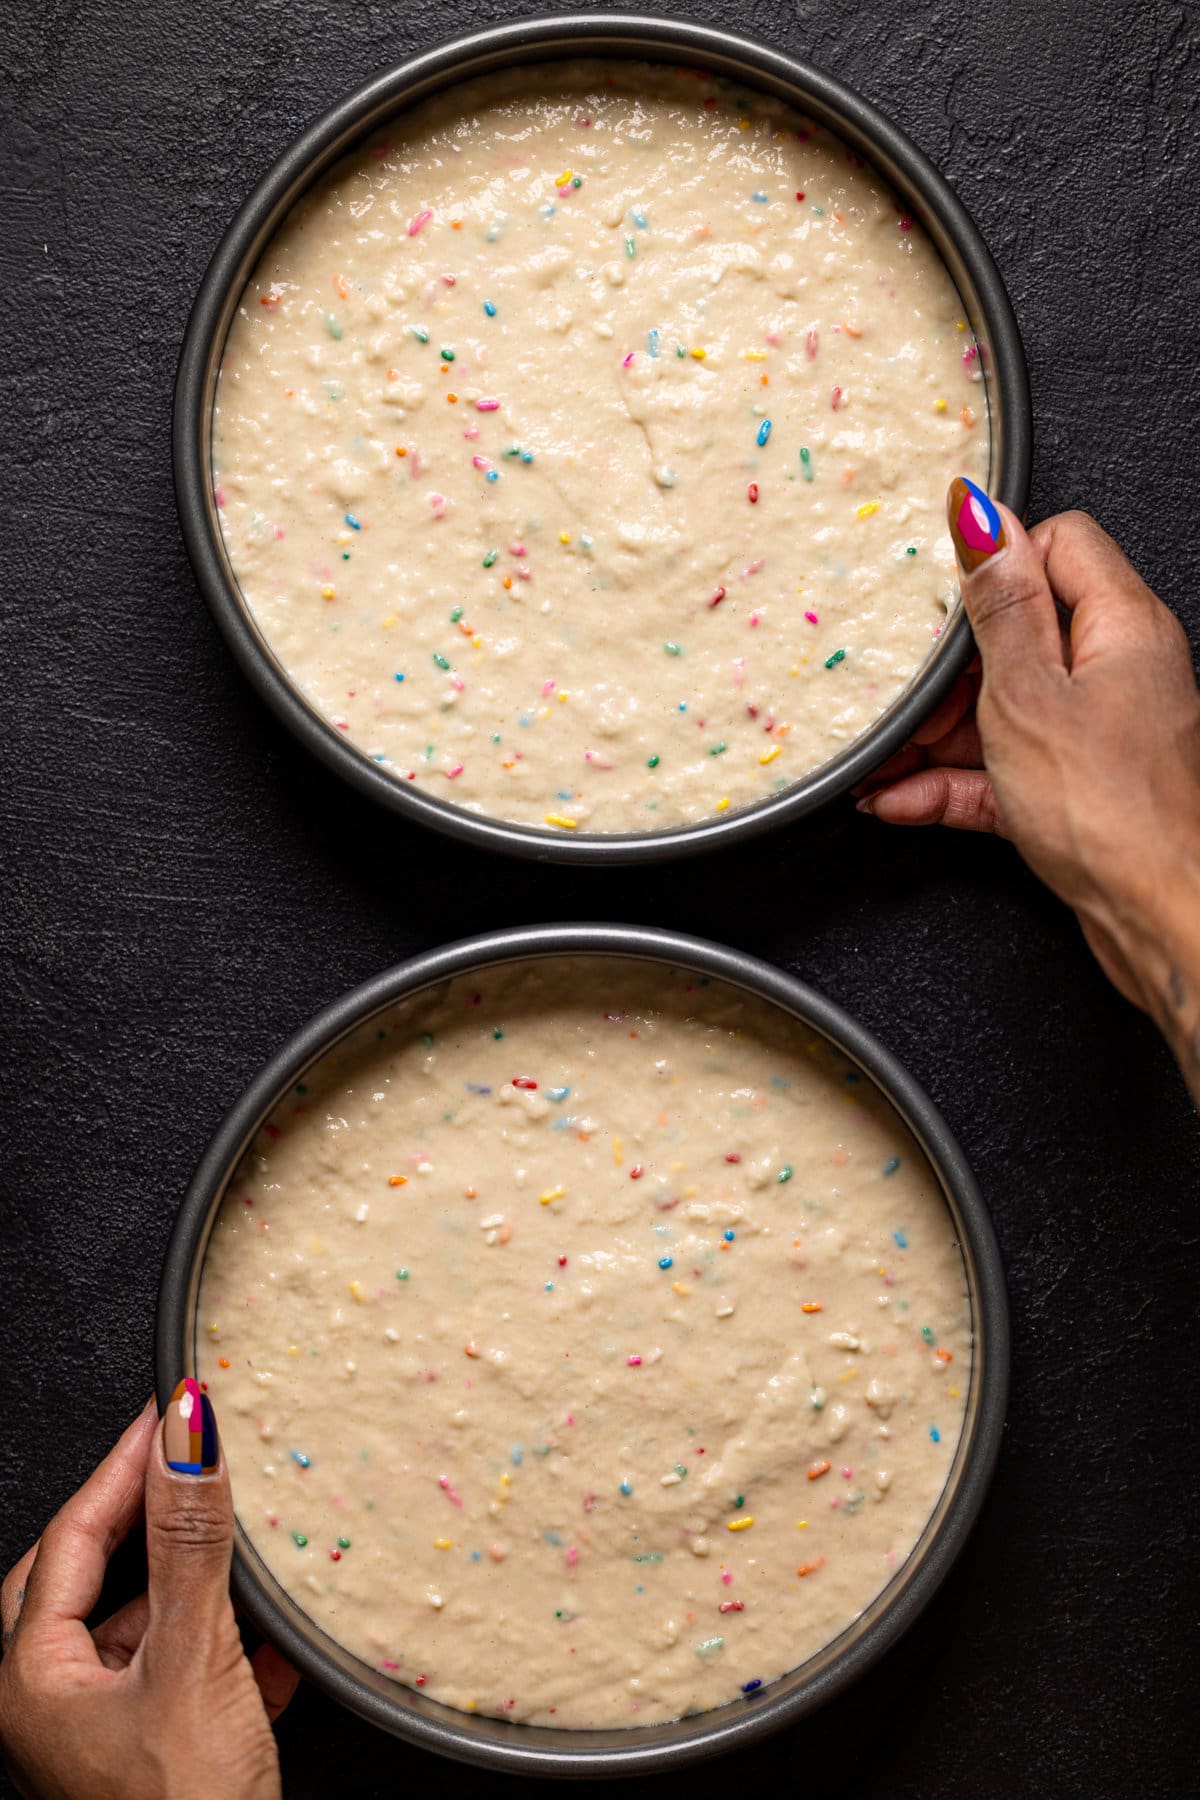 Hands holding two round pans filled with vegan funfetti cake batter